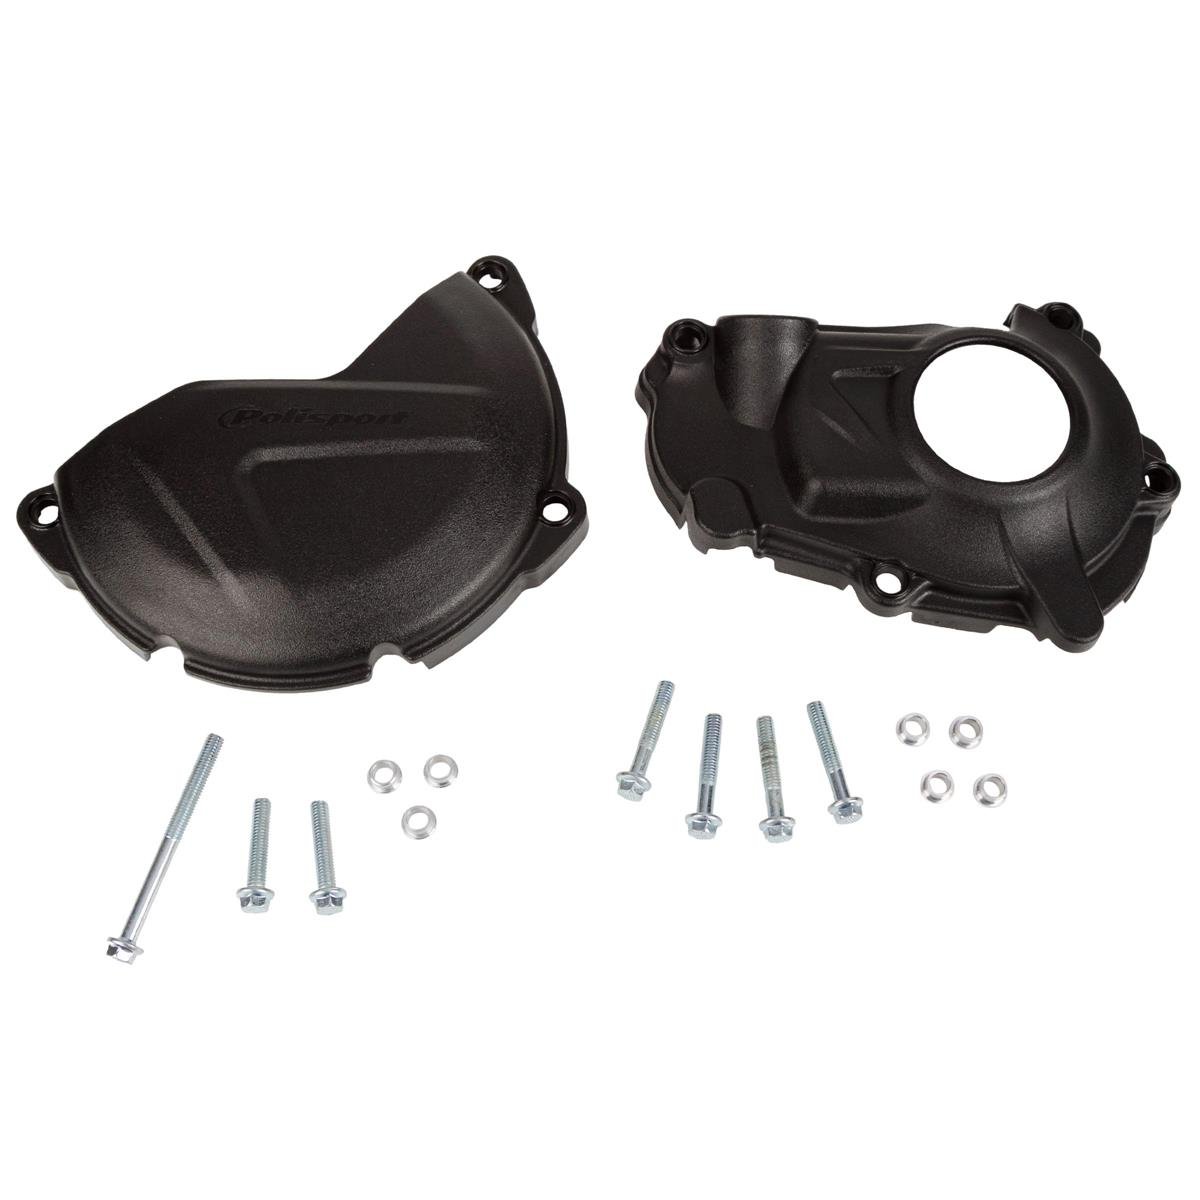 Polisport Clutch/Ignition Cover Protection  Yamaha YZF 450 18-20, Black